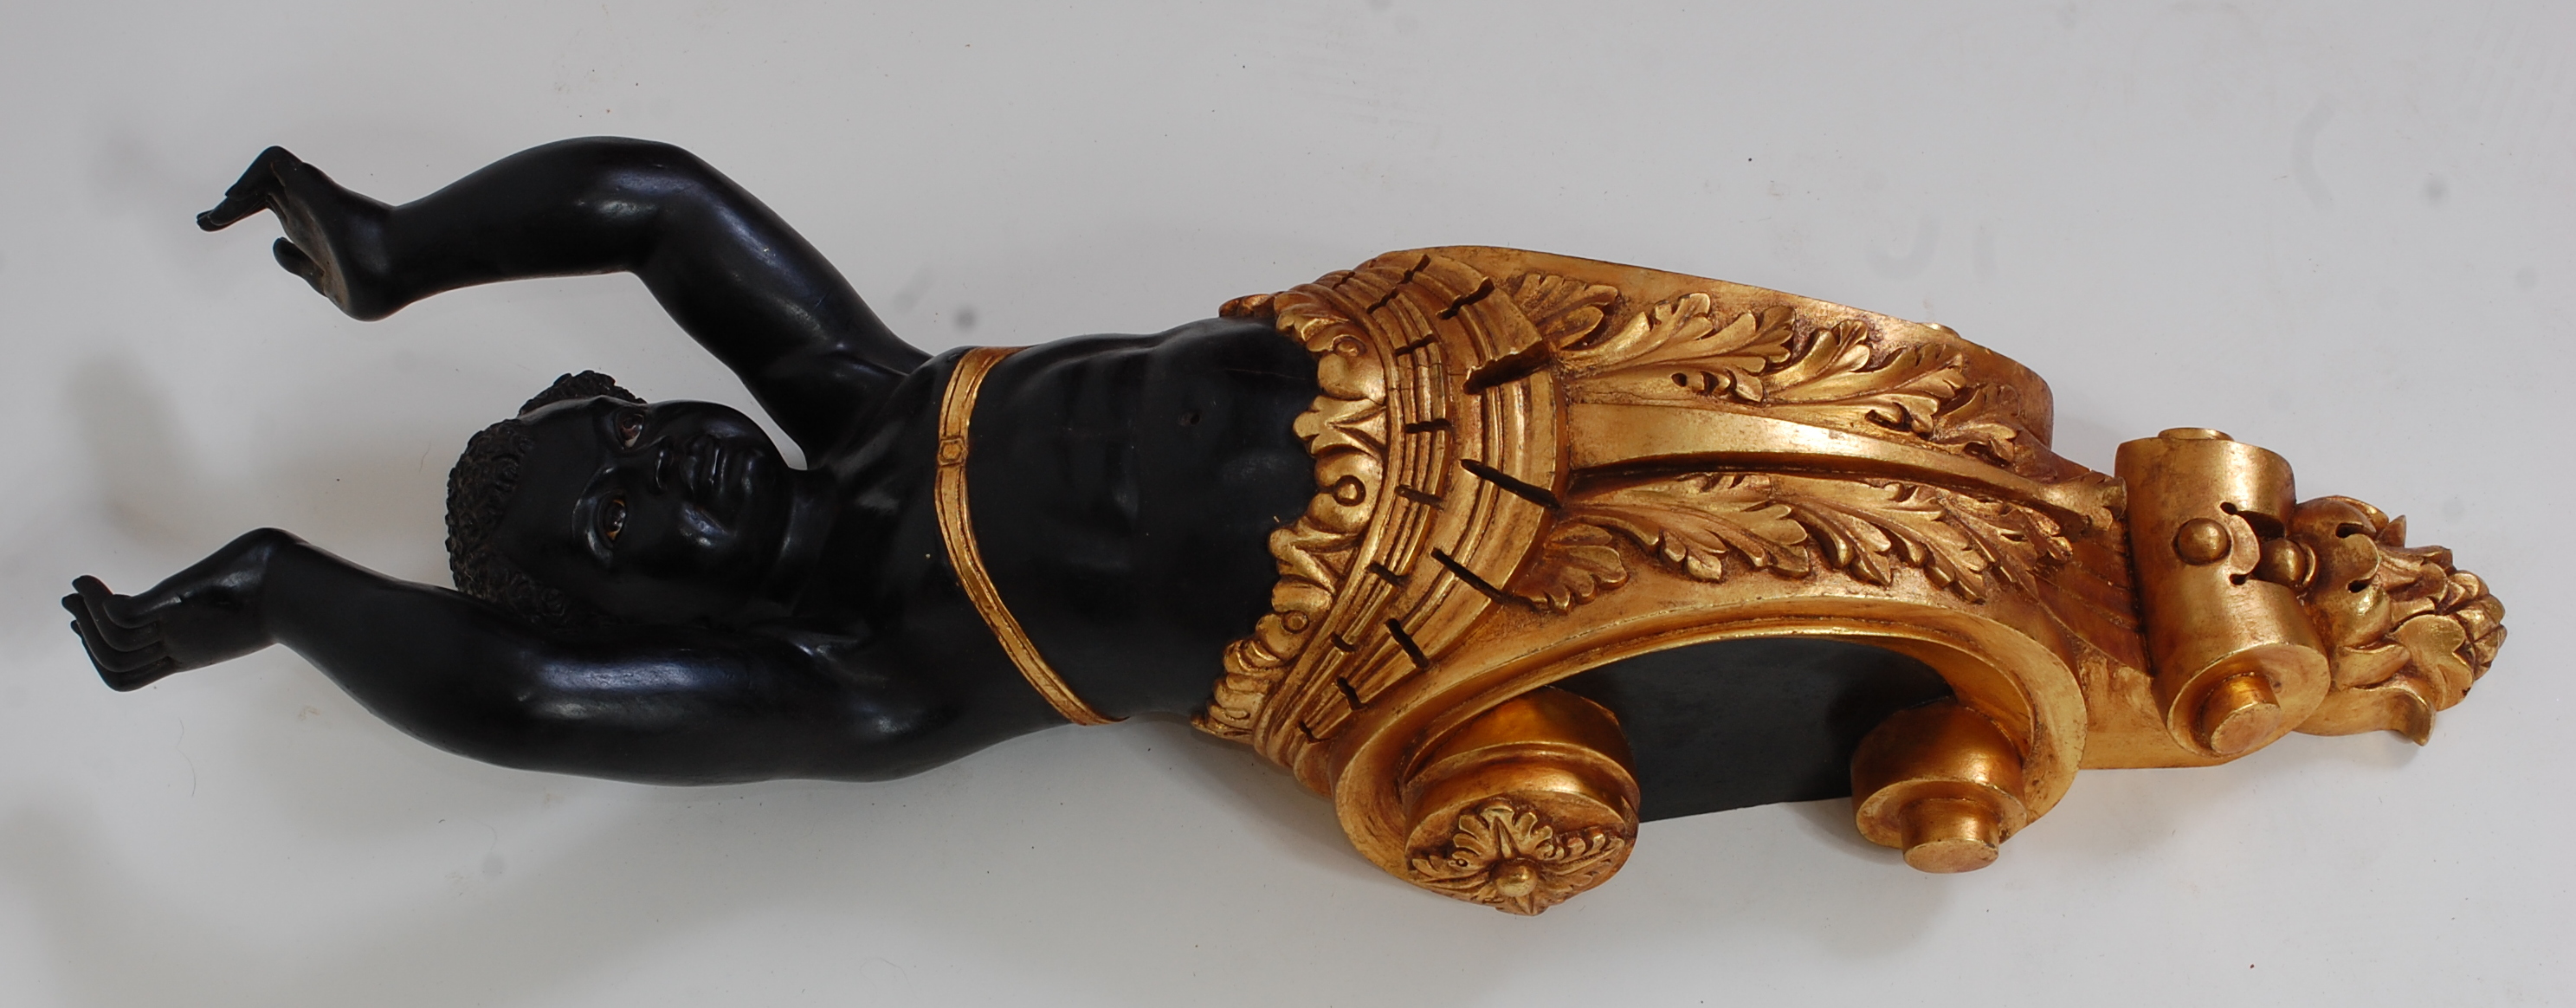 A pair of contemporary Blackamore carved wooden corbels, each in the form of a boy with arms - Image 3 of 3